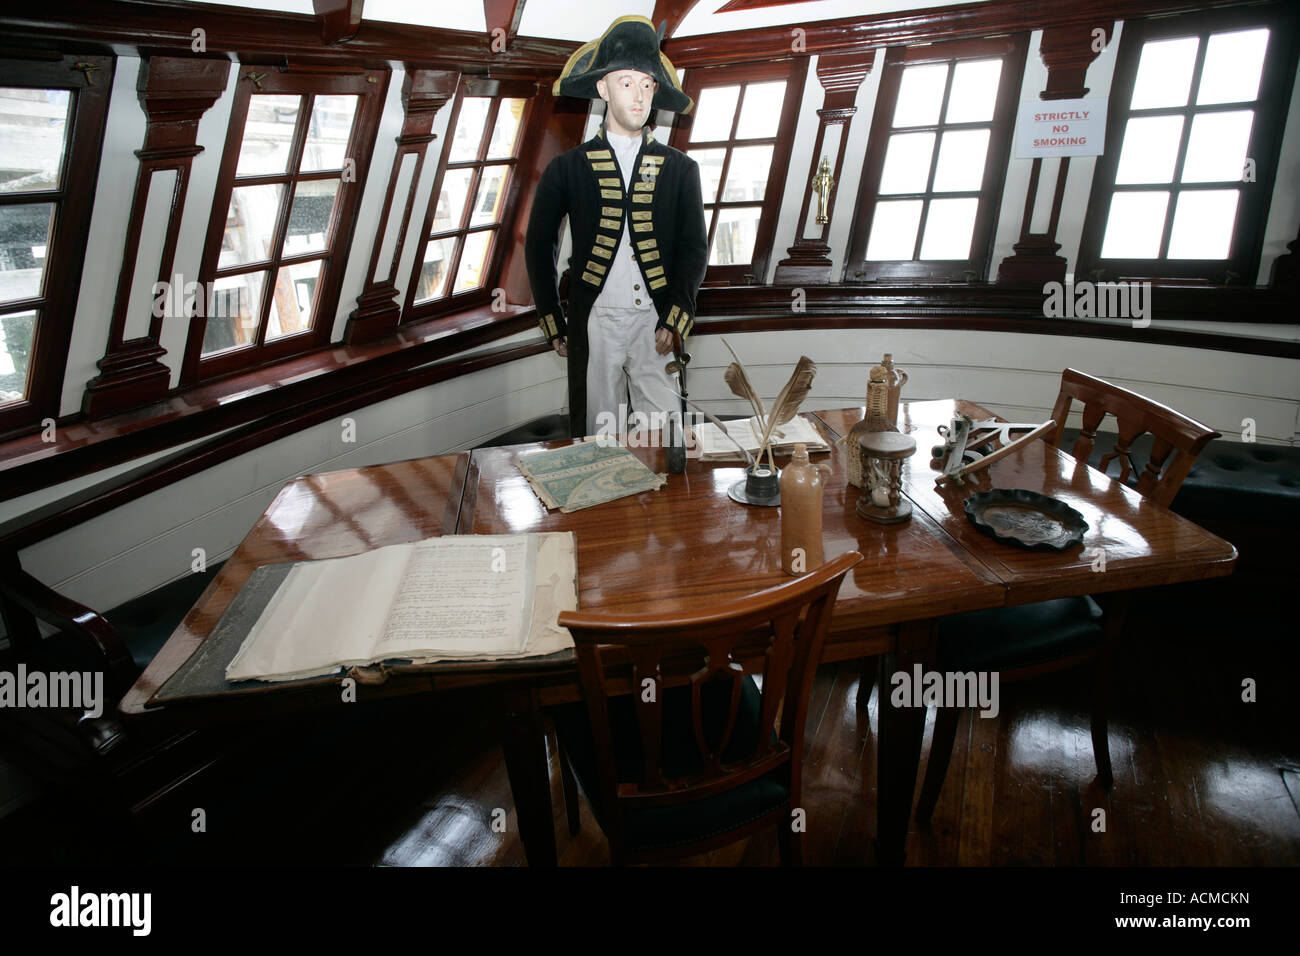 interior-of-the-captains-cabin-of-the-grand-turk-berthed-at-the-end-of-southend-pier-essex-england-uk-ACMCKN.jpg